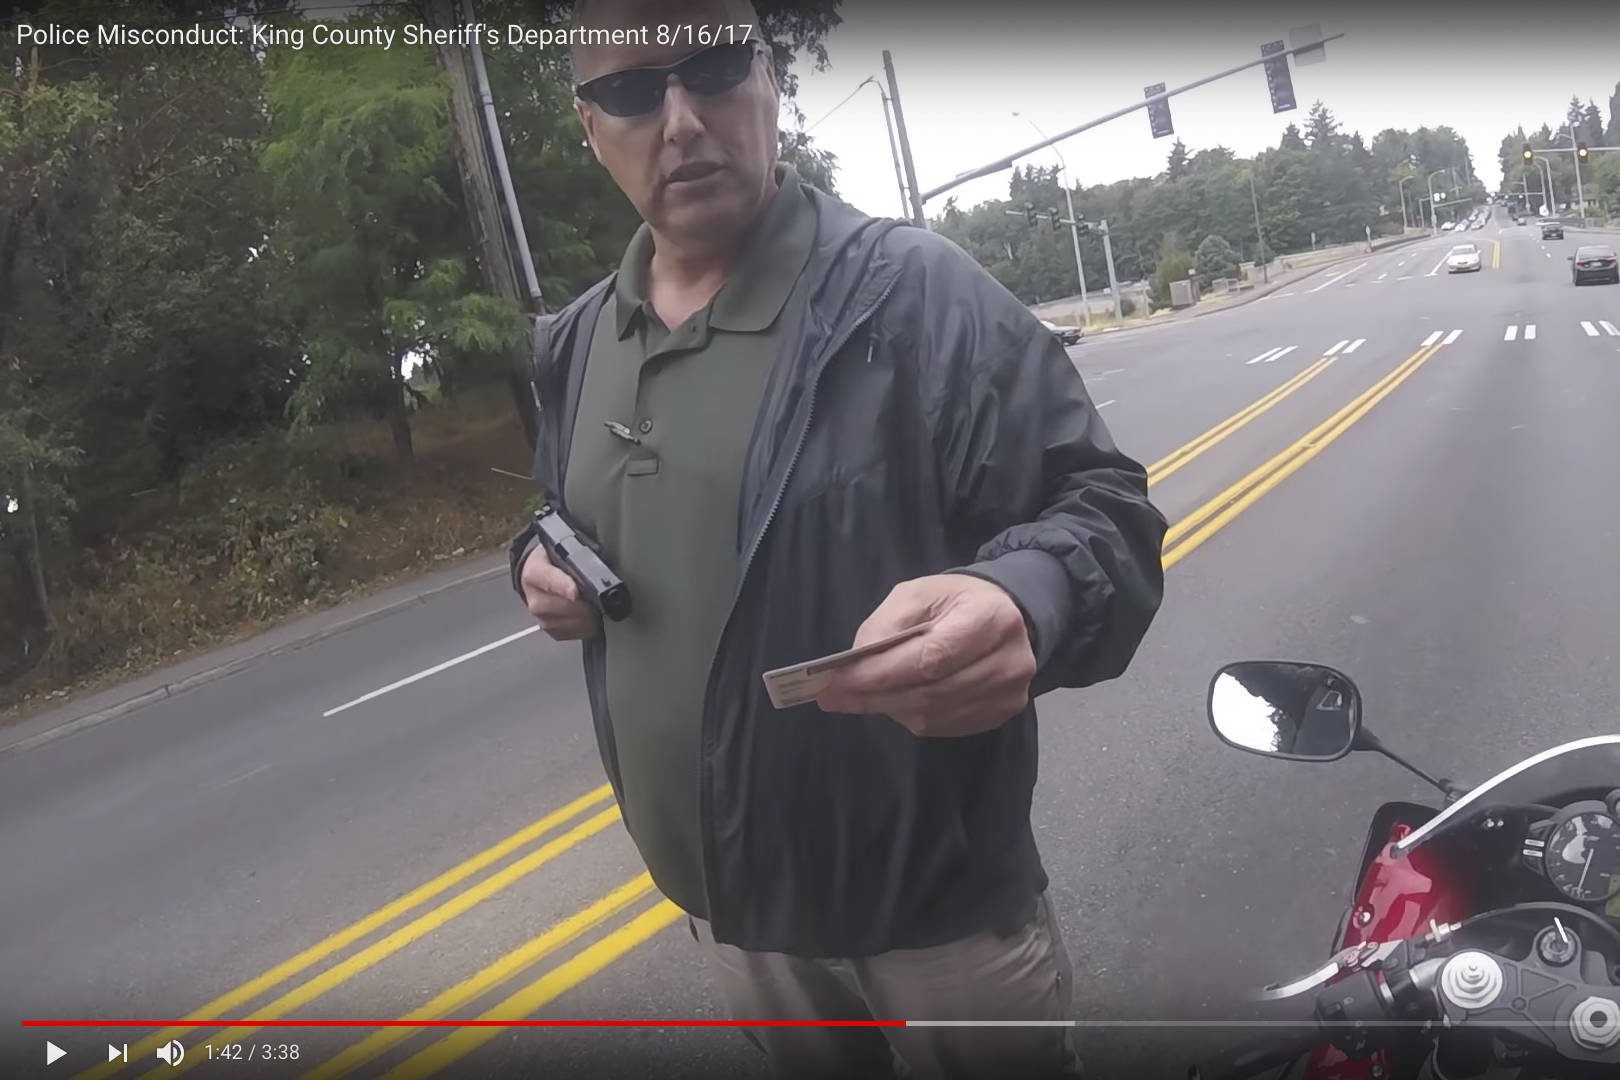 An unidentified gunman, later revealed to be a King County detective, sticks up a motorcyclist at gunpoint. Screenshot via YouTube user Squid Tips, aka Alex Randall